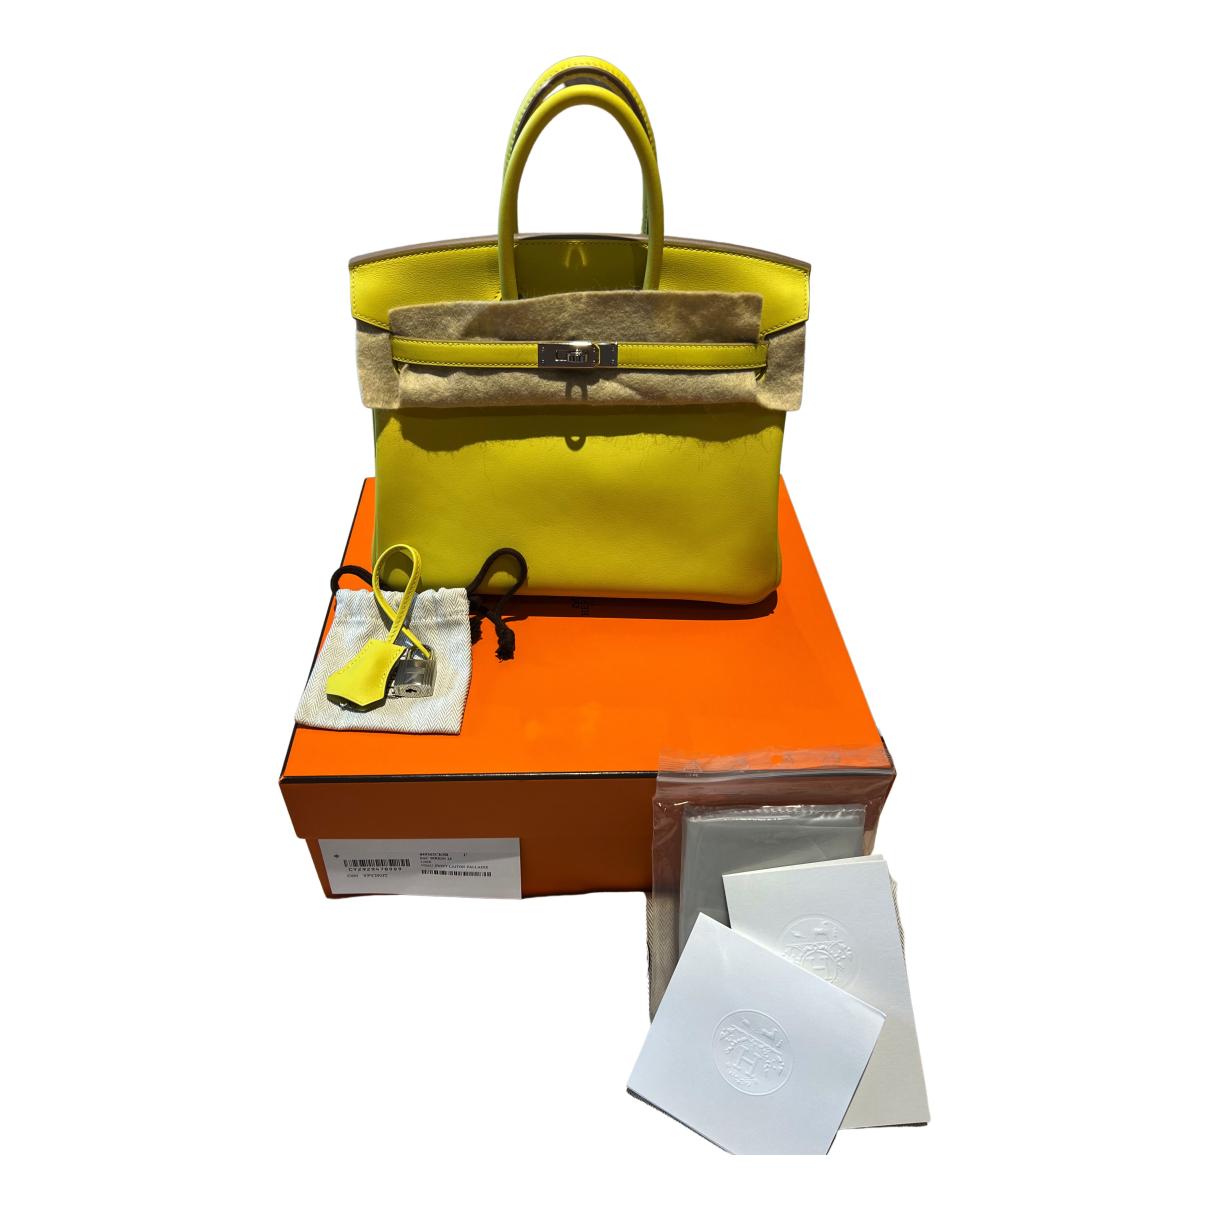 Sold at Auction: HERMÈS Handtasche BIRKIN BAG 25 - IN AND OUT.